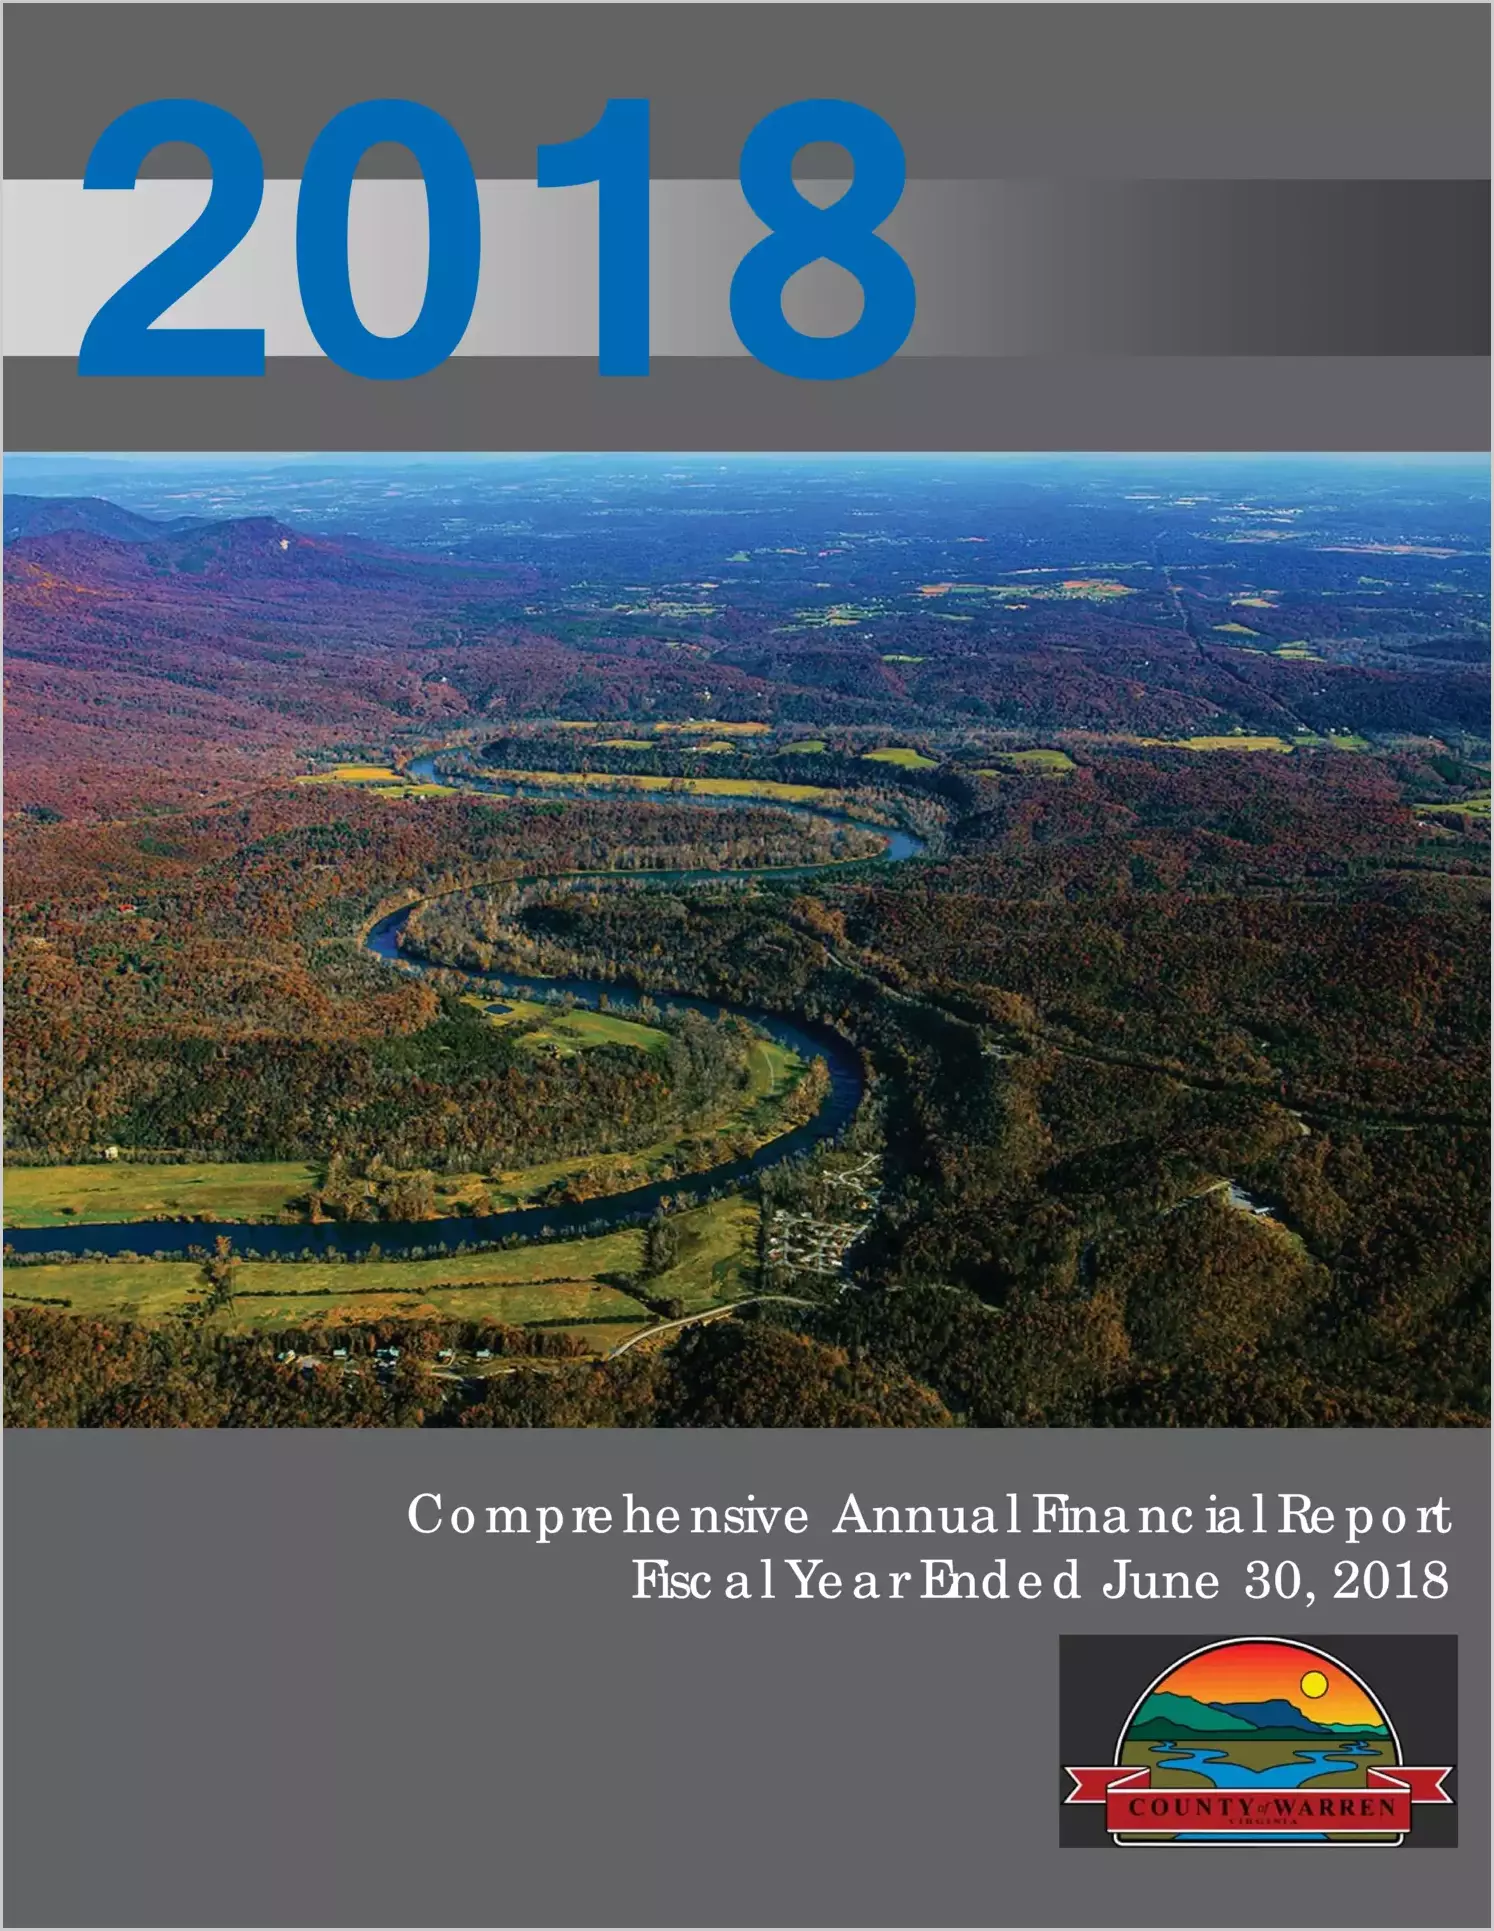 2018 Annual Financial Report for County of Warren